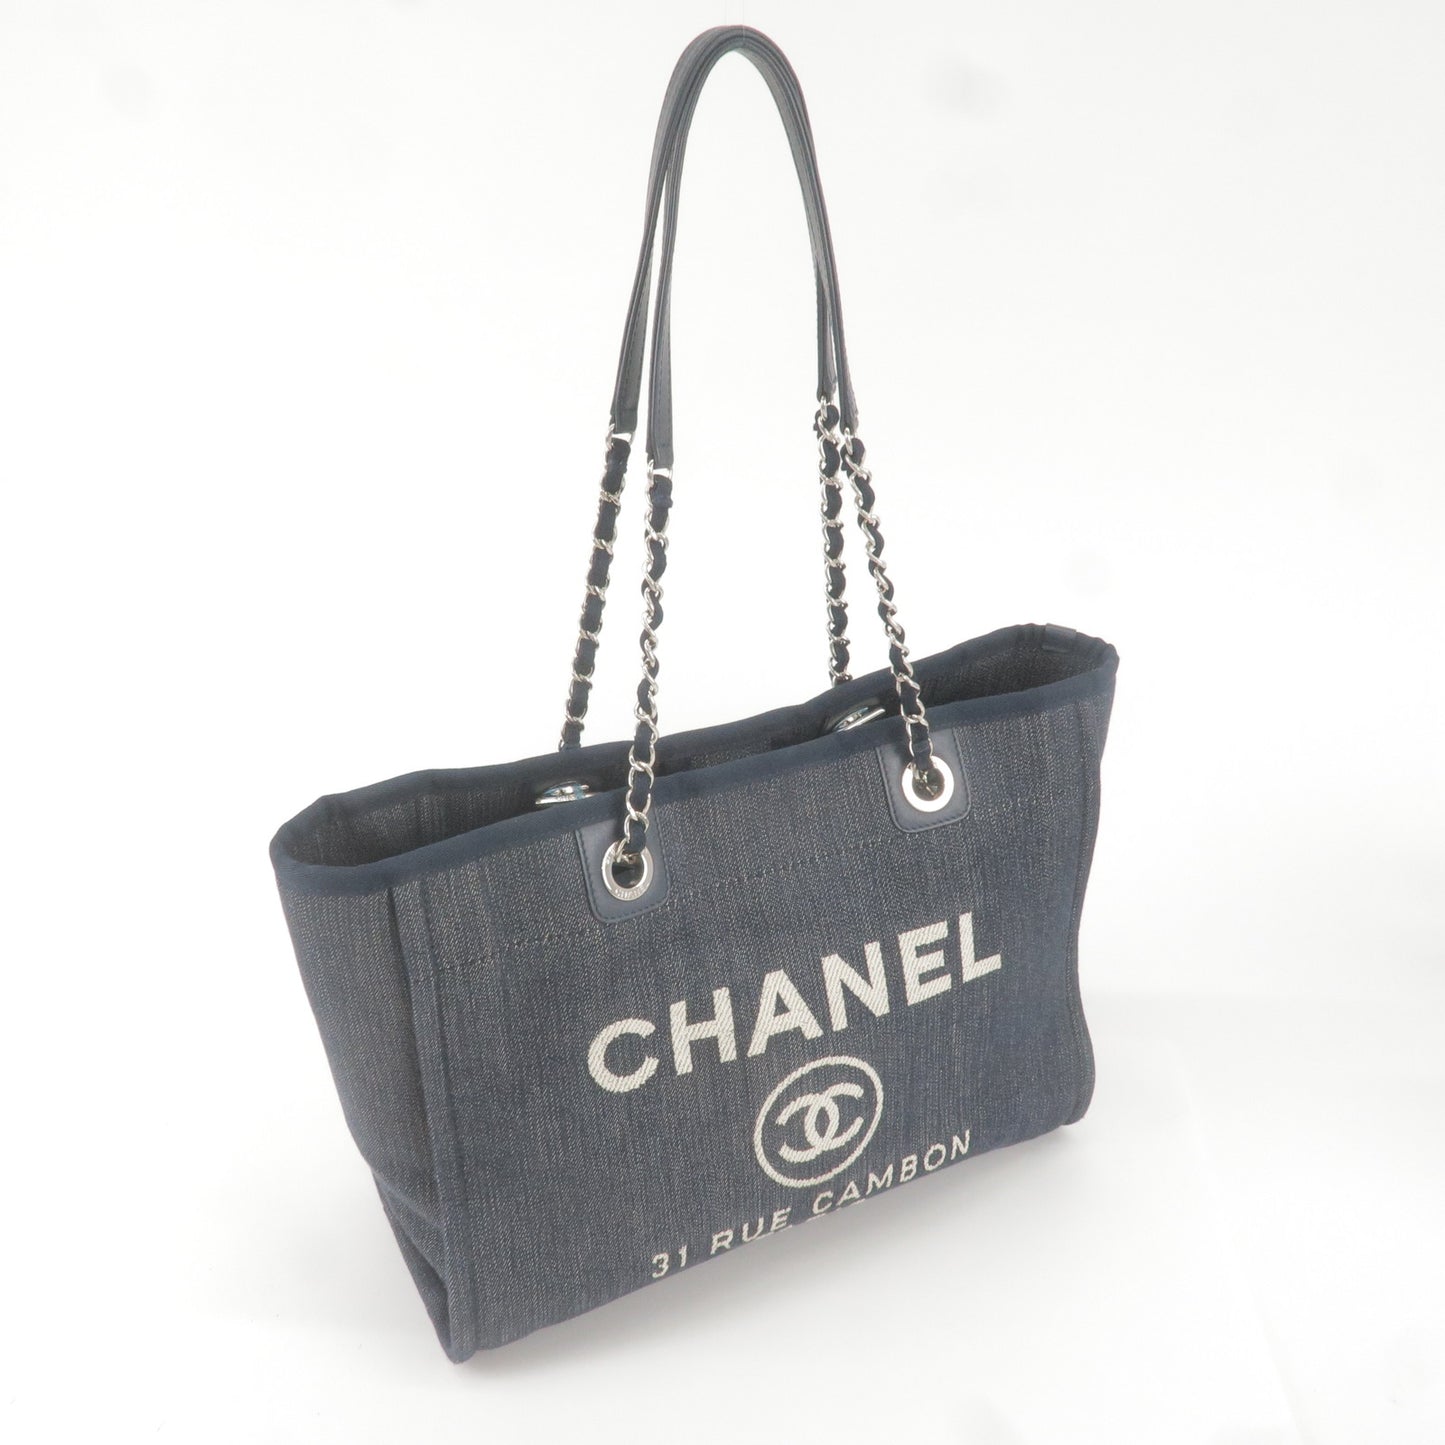 Chanel Deauville Tote, Canvas, Brown/orange SHW - Laulay Luxury